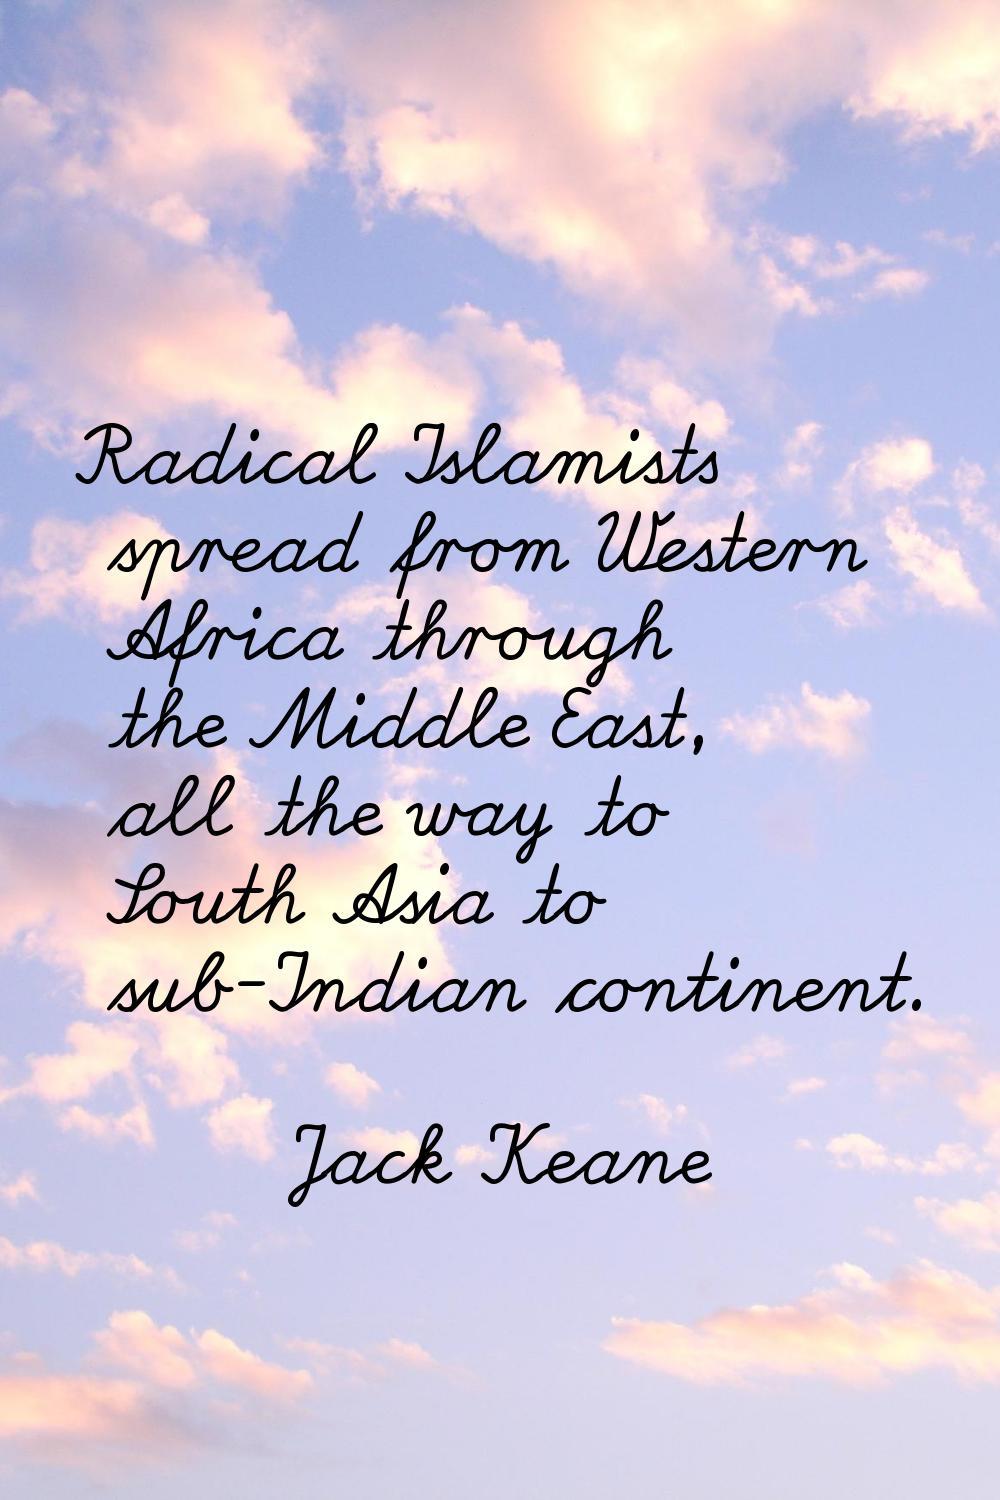 Radical Islamists spread from Western Africa through the Middle East, all the way to South Asia to 